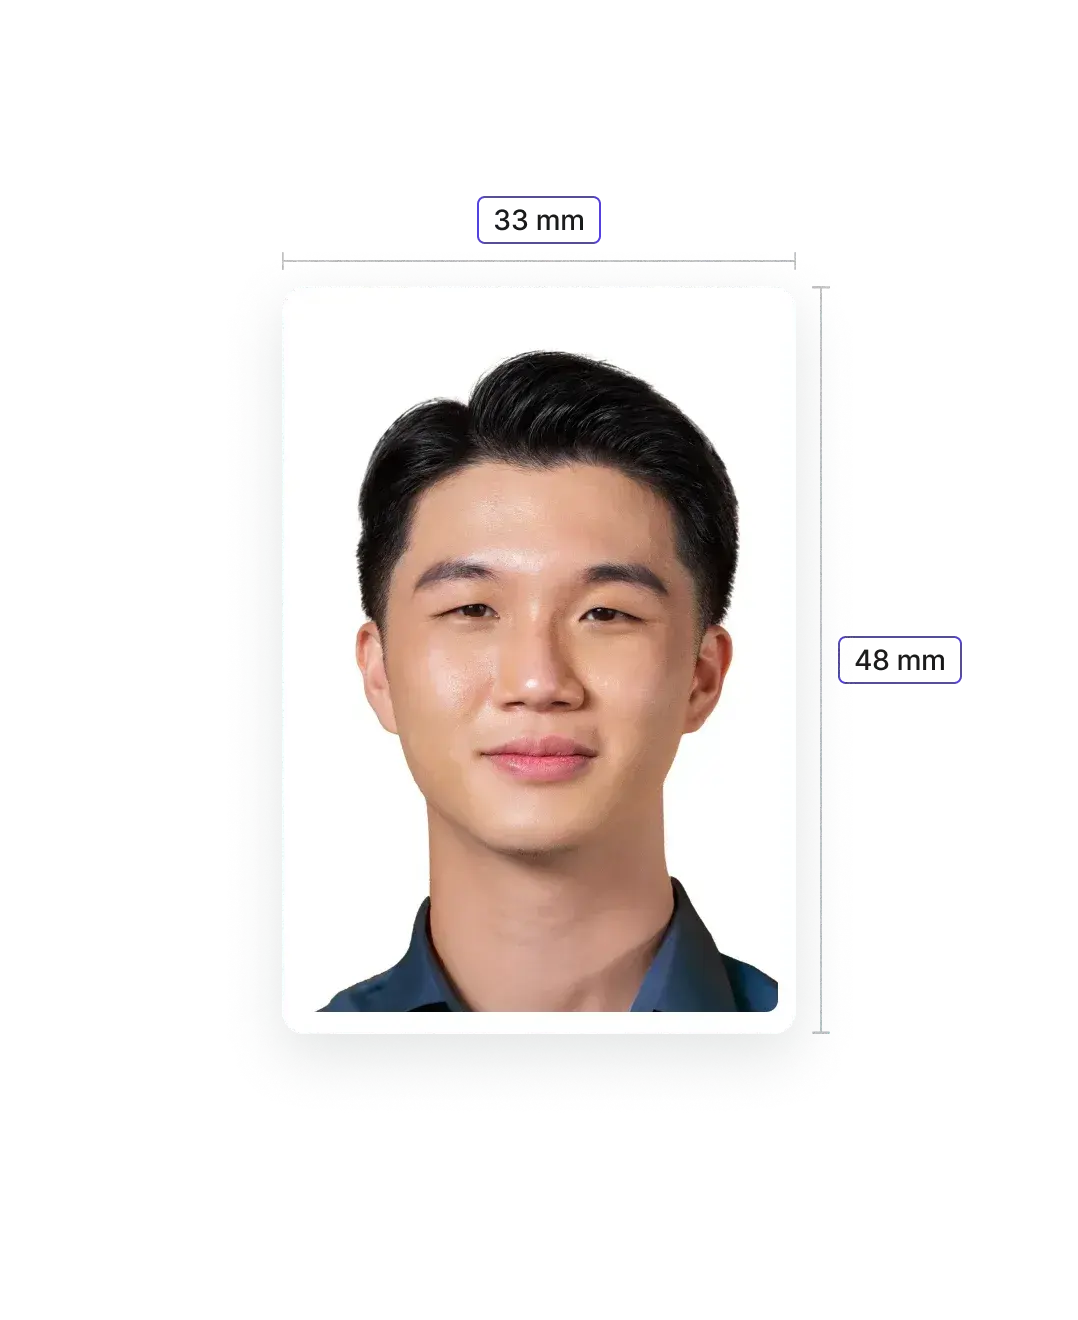 Chinese Visa Photo—Specifications